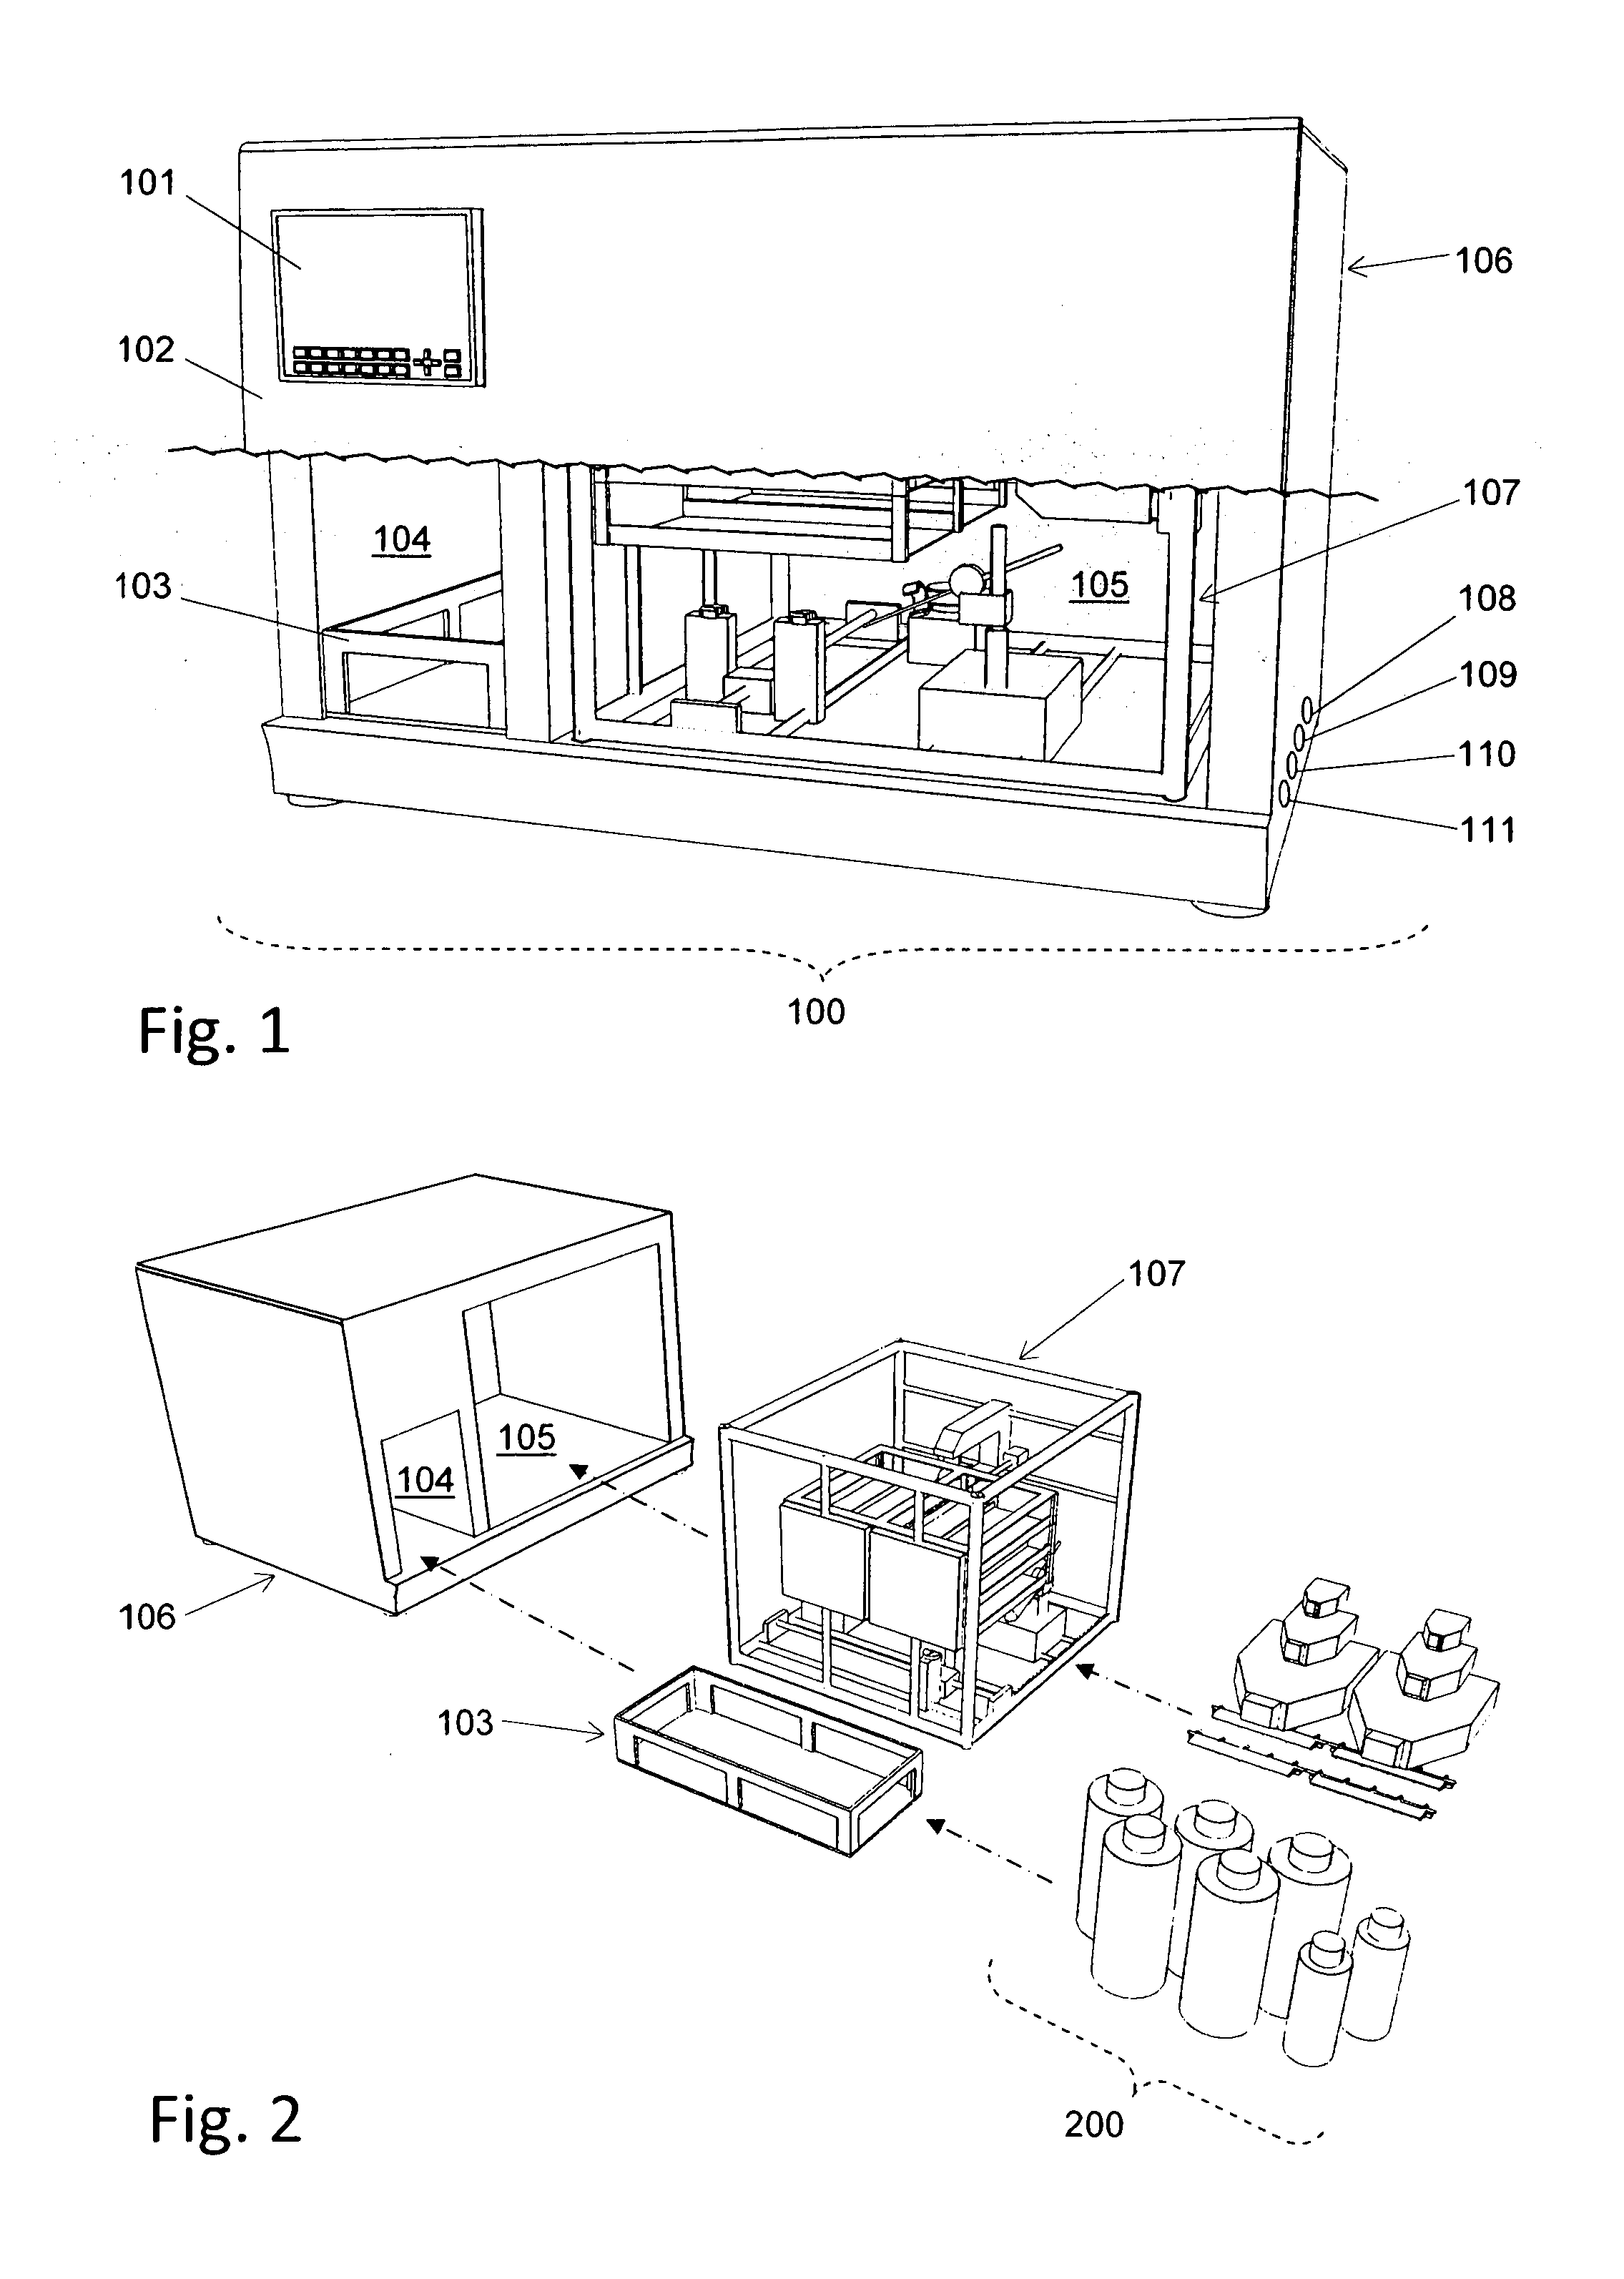 Automated cell culture system